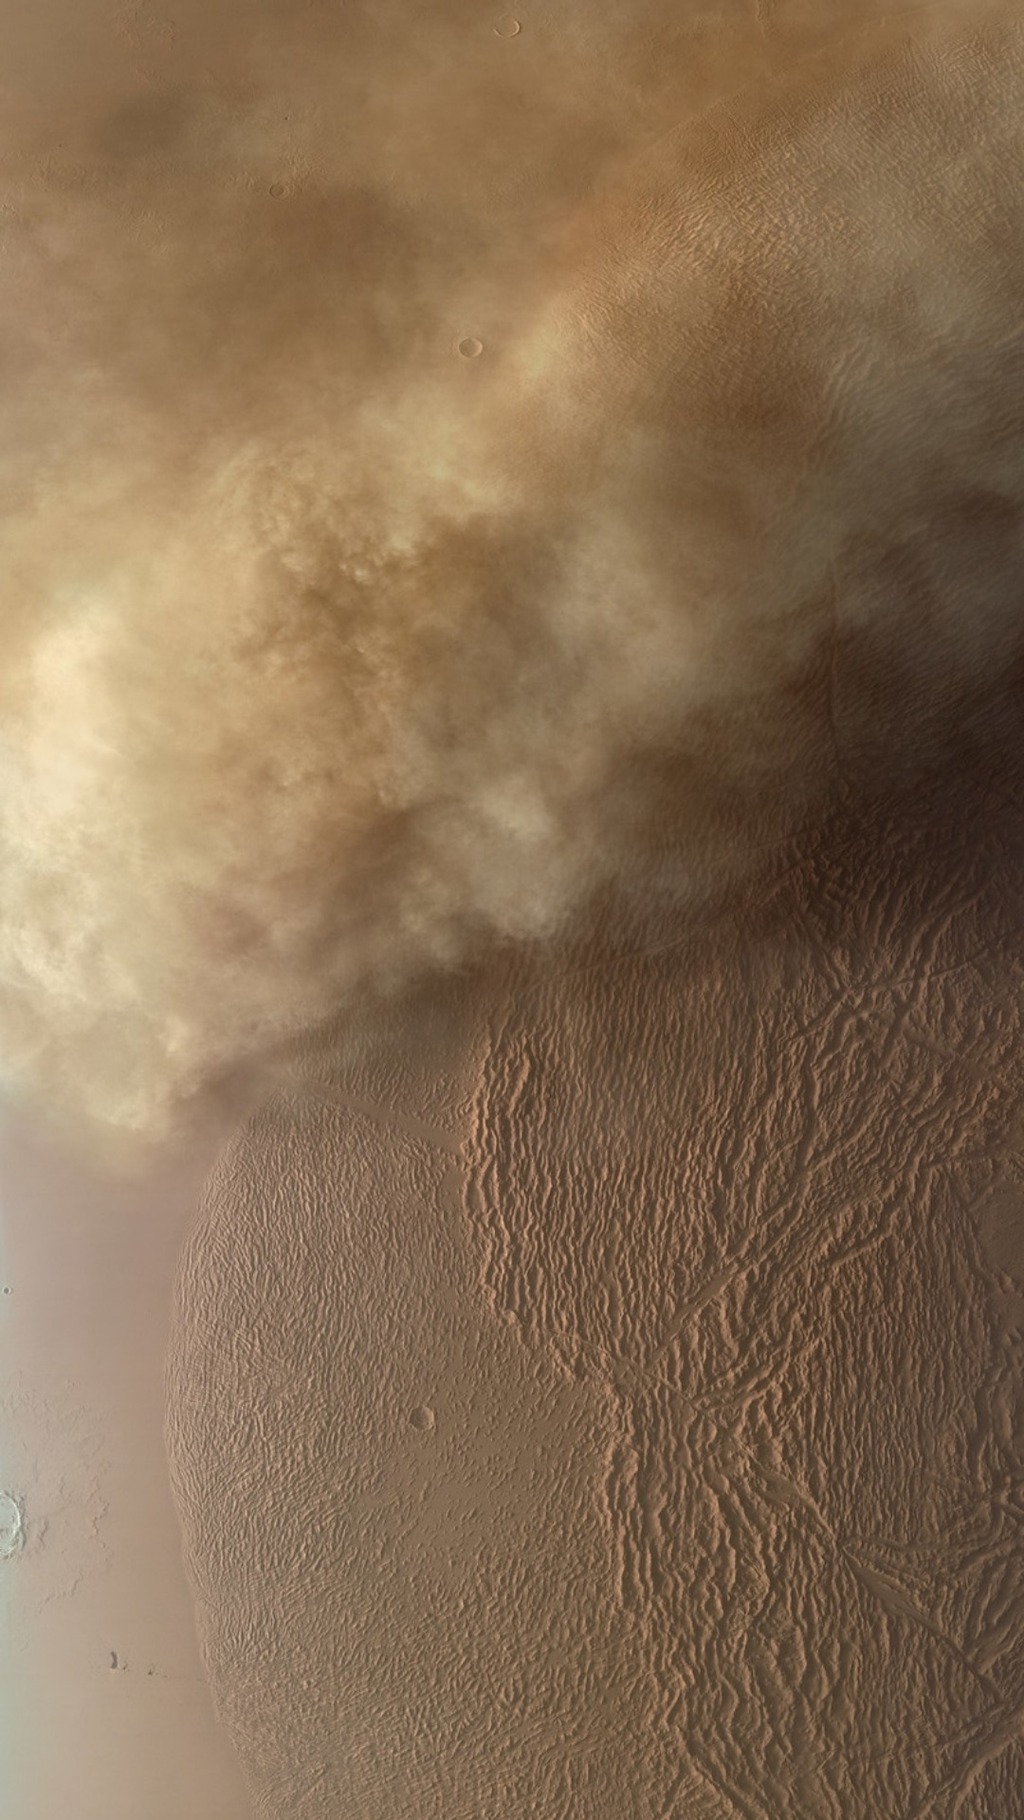 Orange dust storm from above the surface of Mars